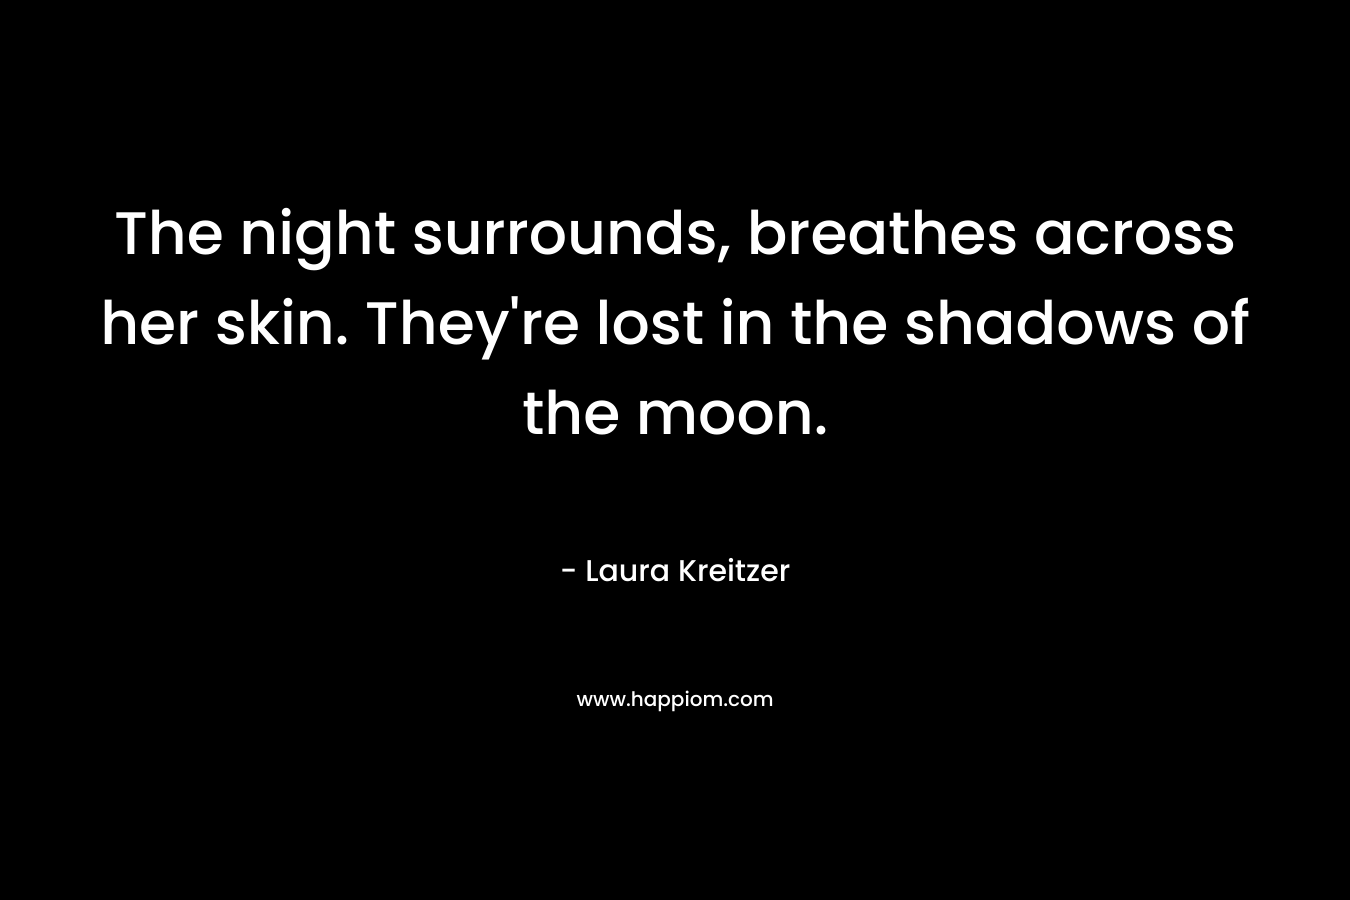 The night surrounds, breathes across her skin. They’re lost in the shadows of the moon. – Laura Kreitzer